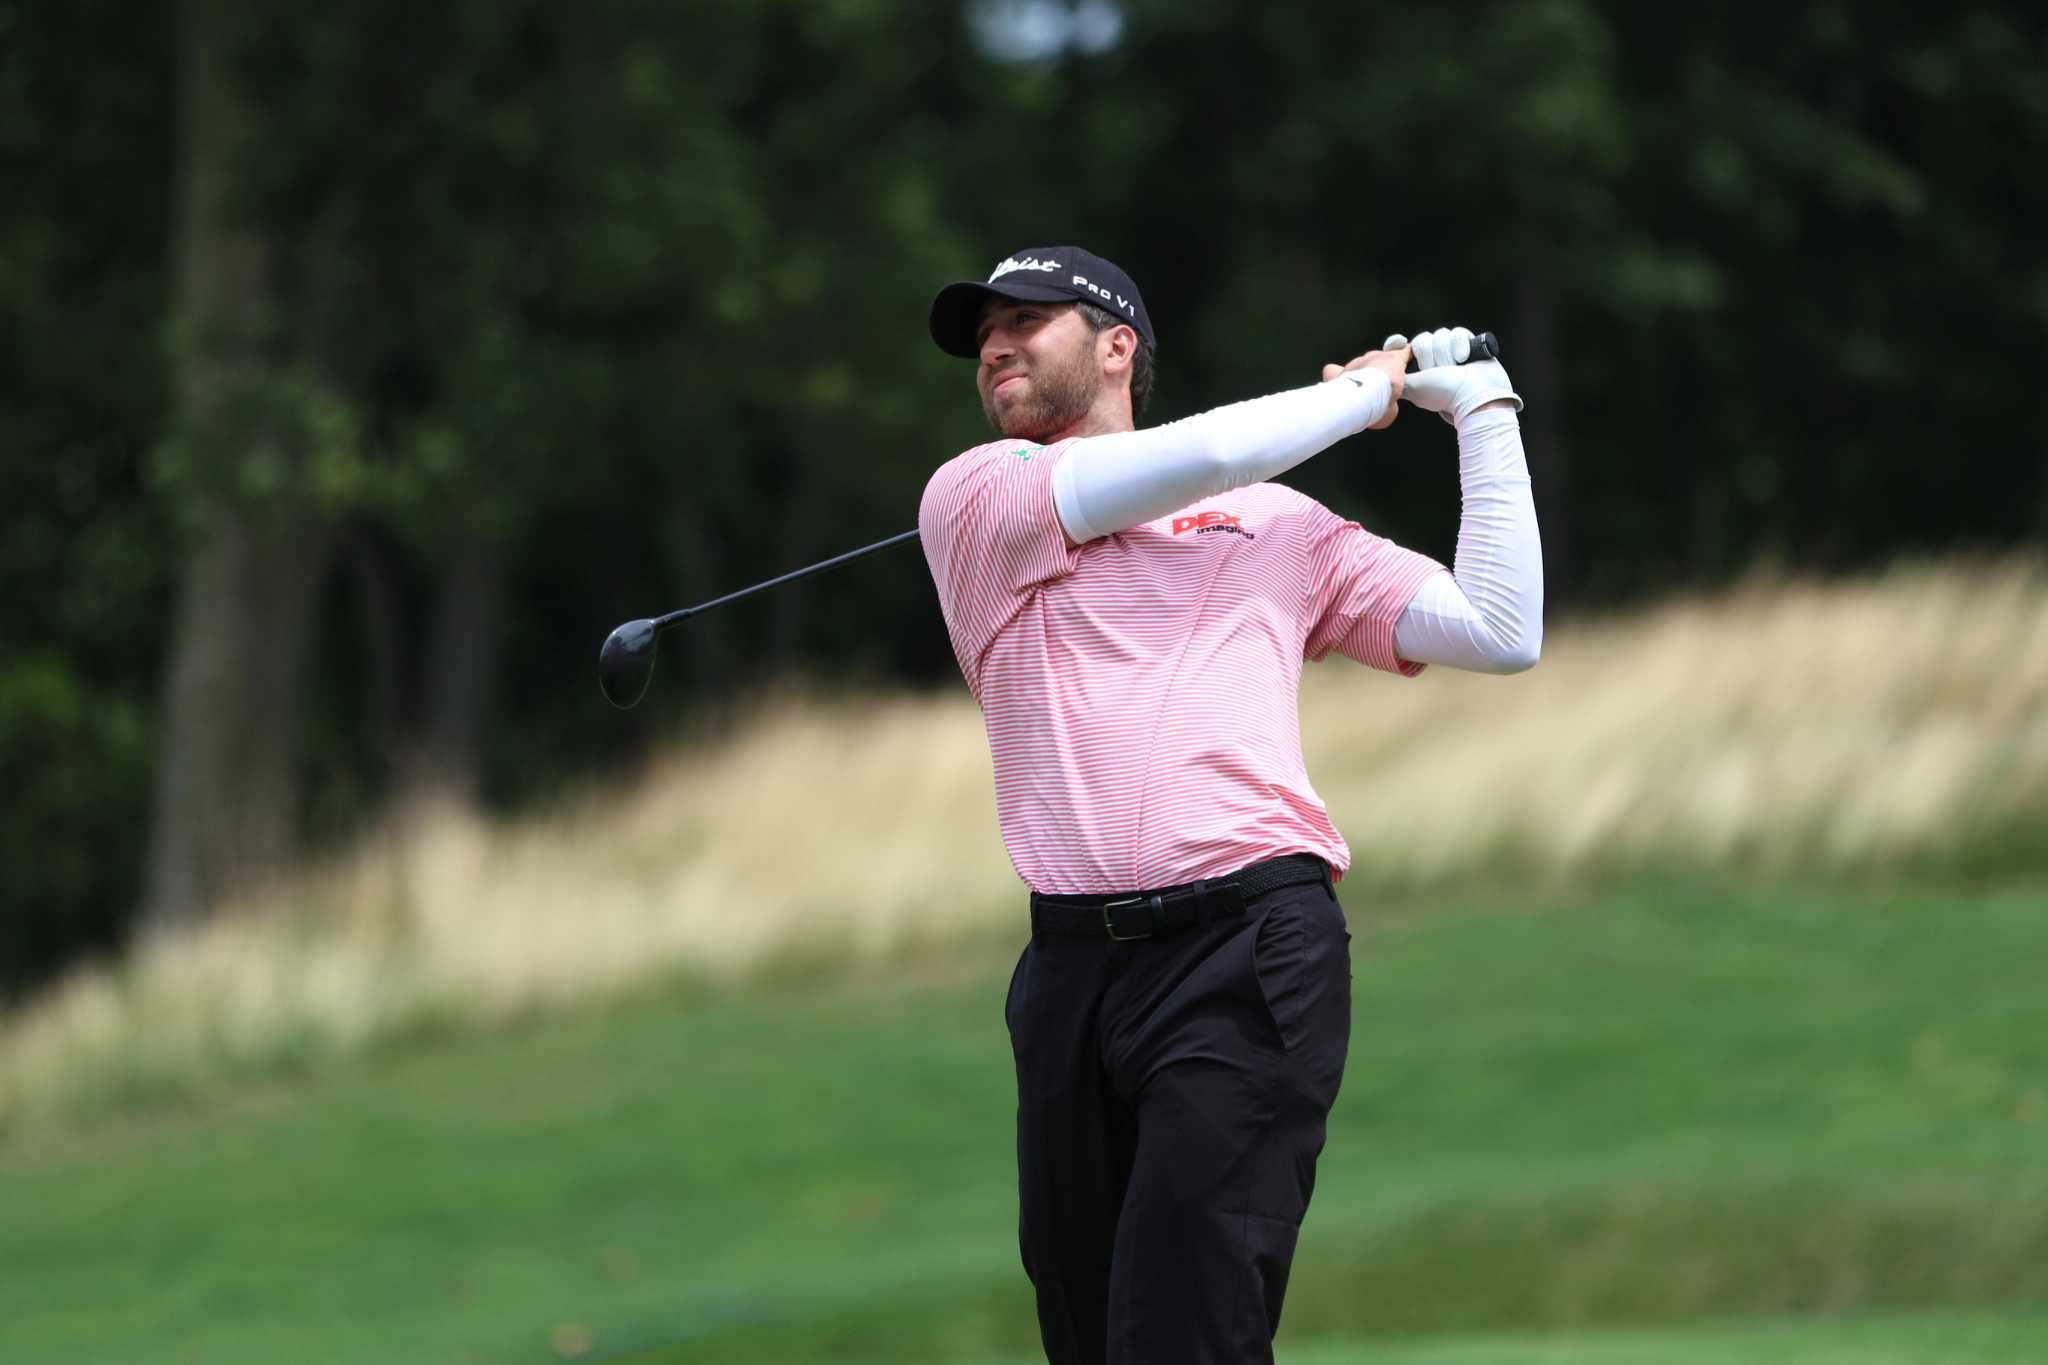 Greenwich’s Pastore qualifies for PGA Farmers Insurance Open